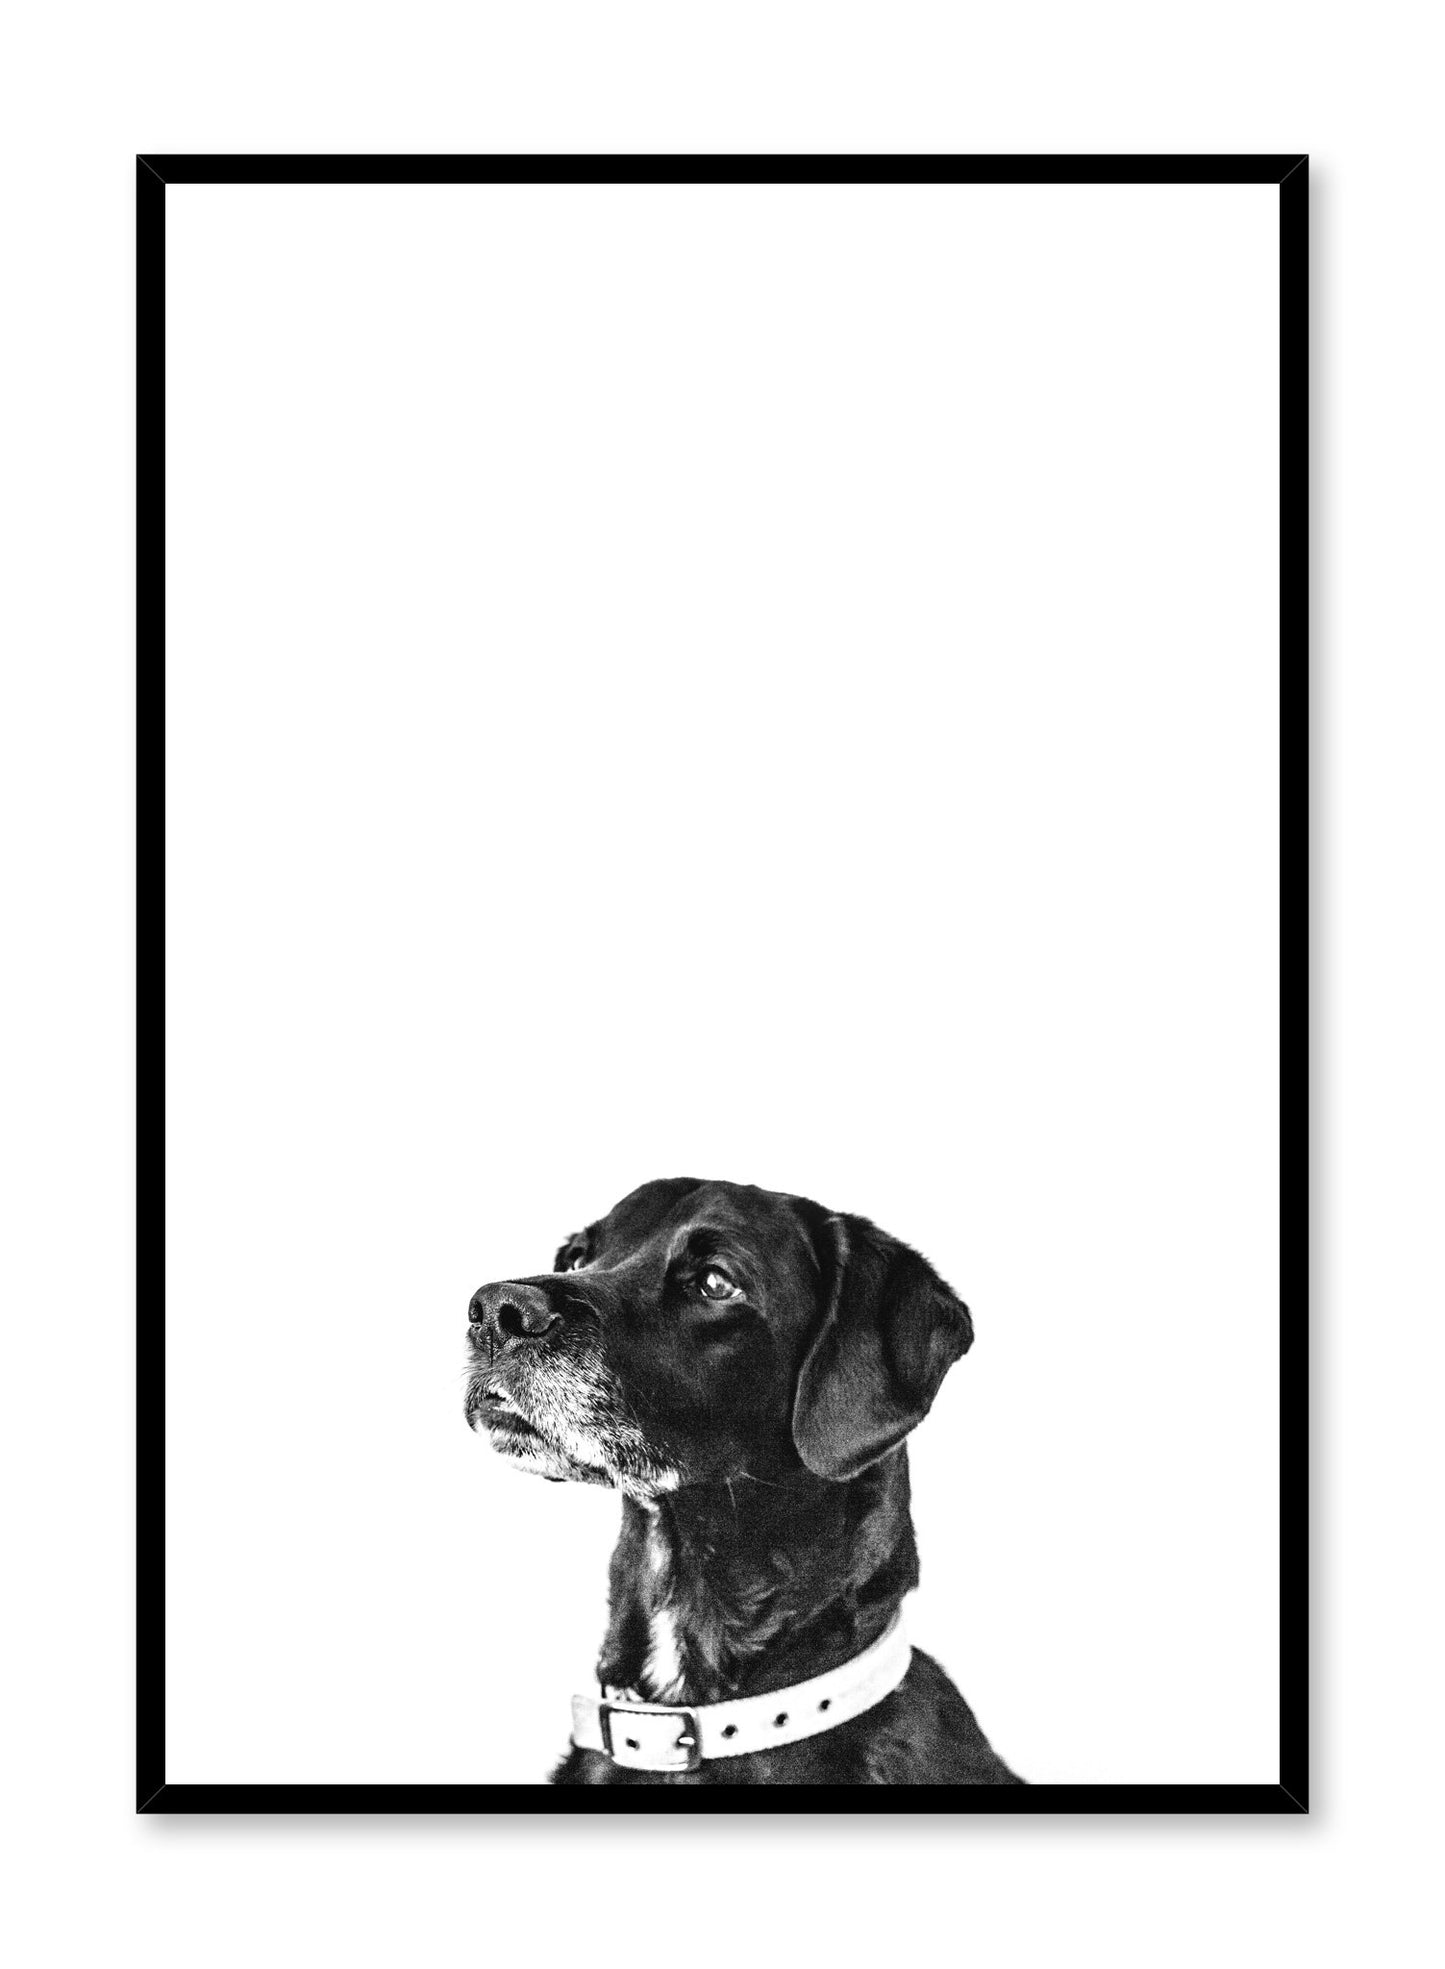 Modern minimalist black and white photo print of a dog by Opposite Wall